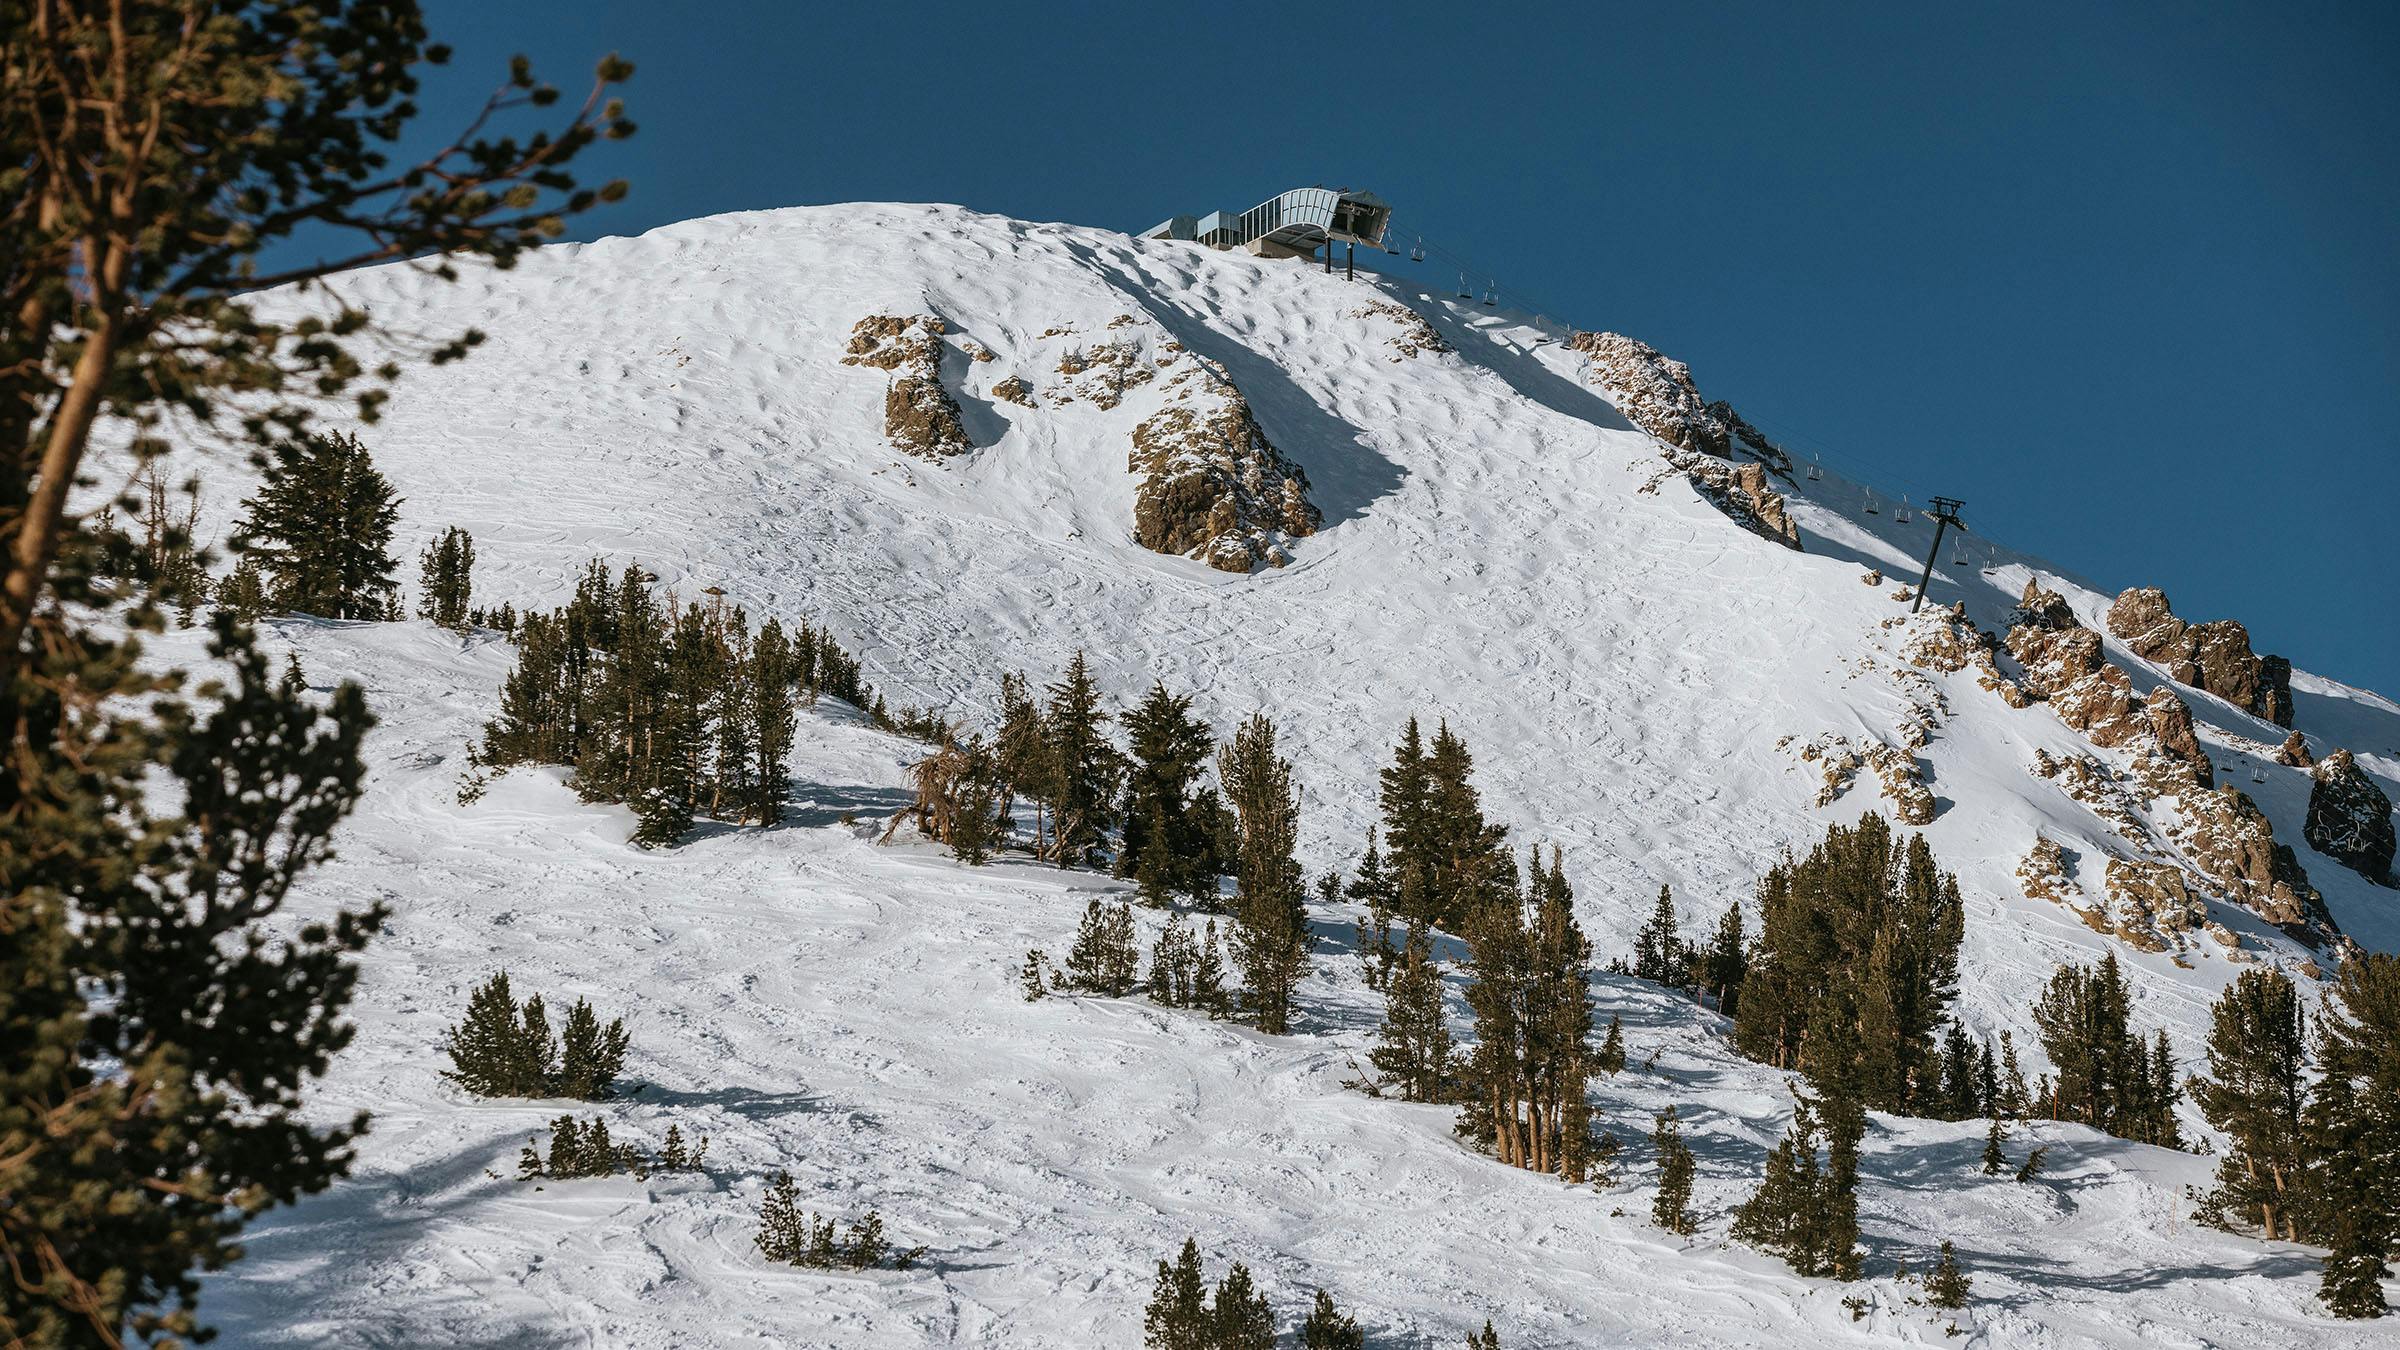 Scenic photo of Mammoth Mountain on a bluebird day during spring skiing season